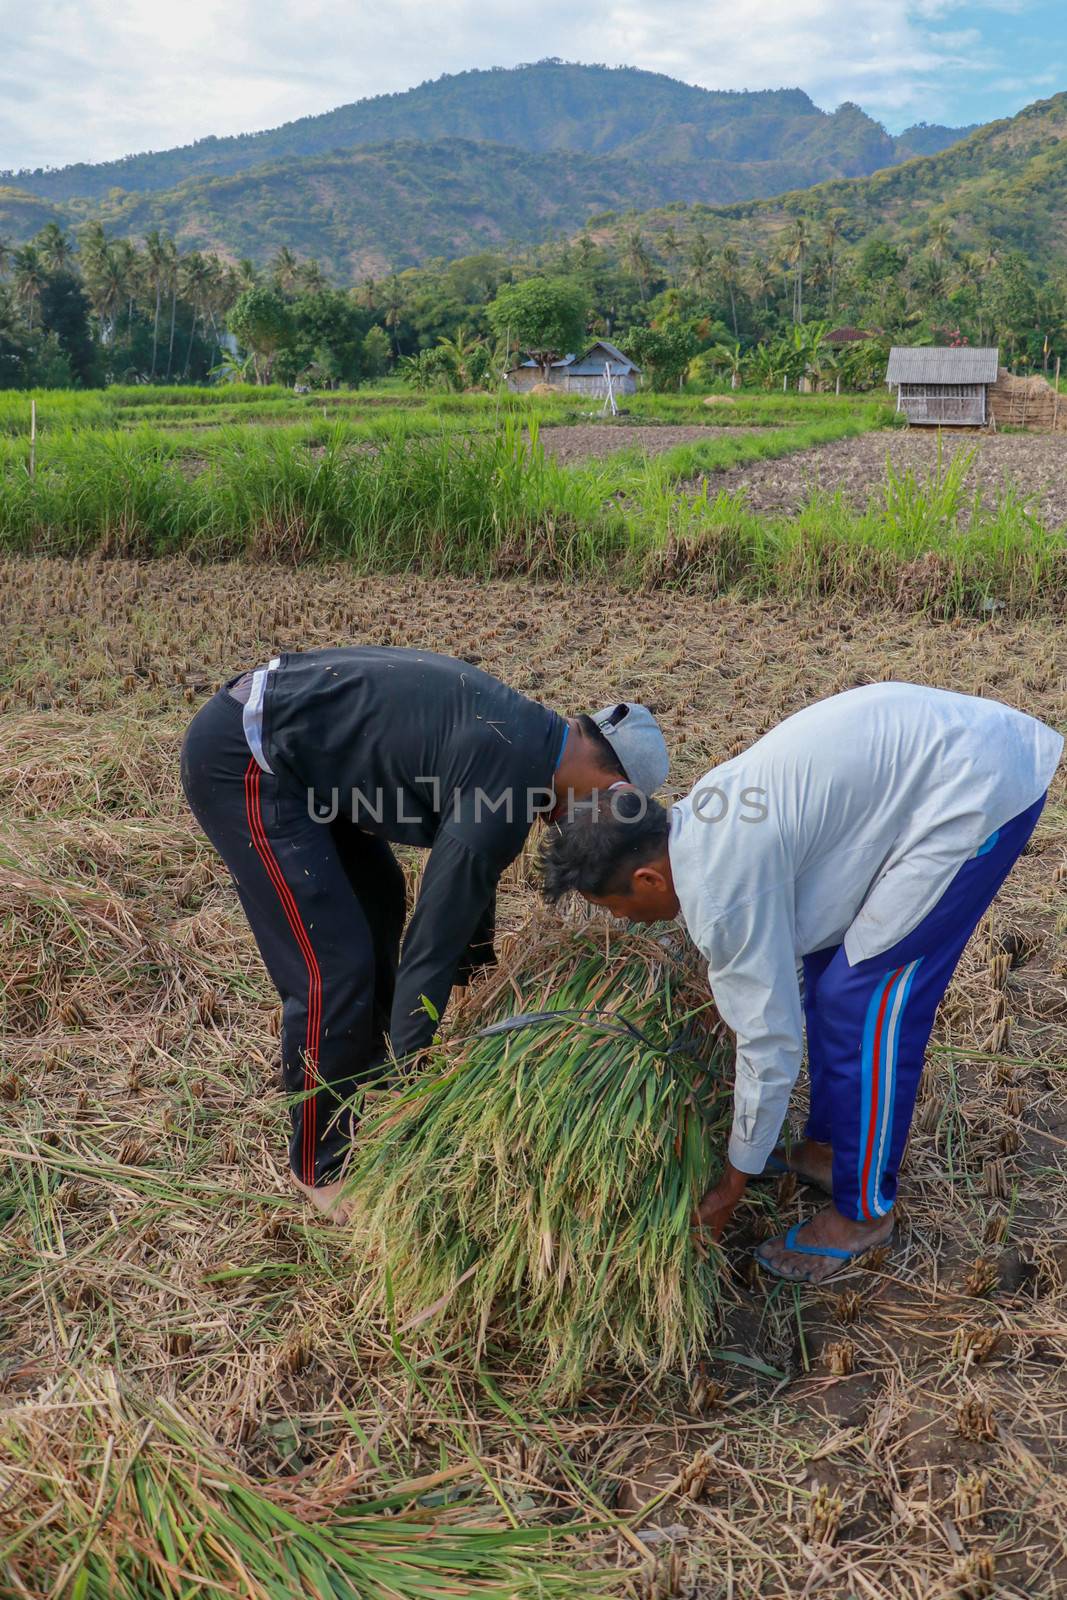 Balinese rice farmer at work harvesting ripe rice on a beautiful sunny day. Two men working in the field. A younger man helps an older one to pick up sheaf of grass by Sanatana2008